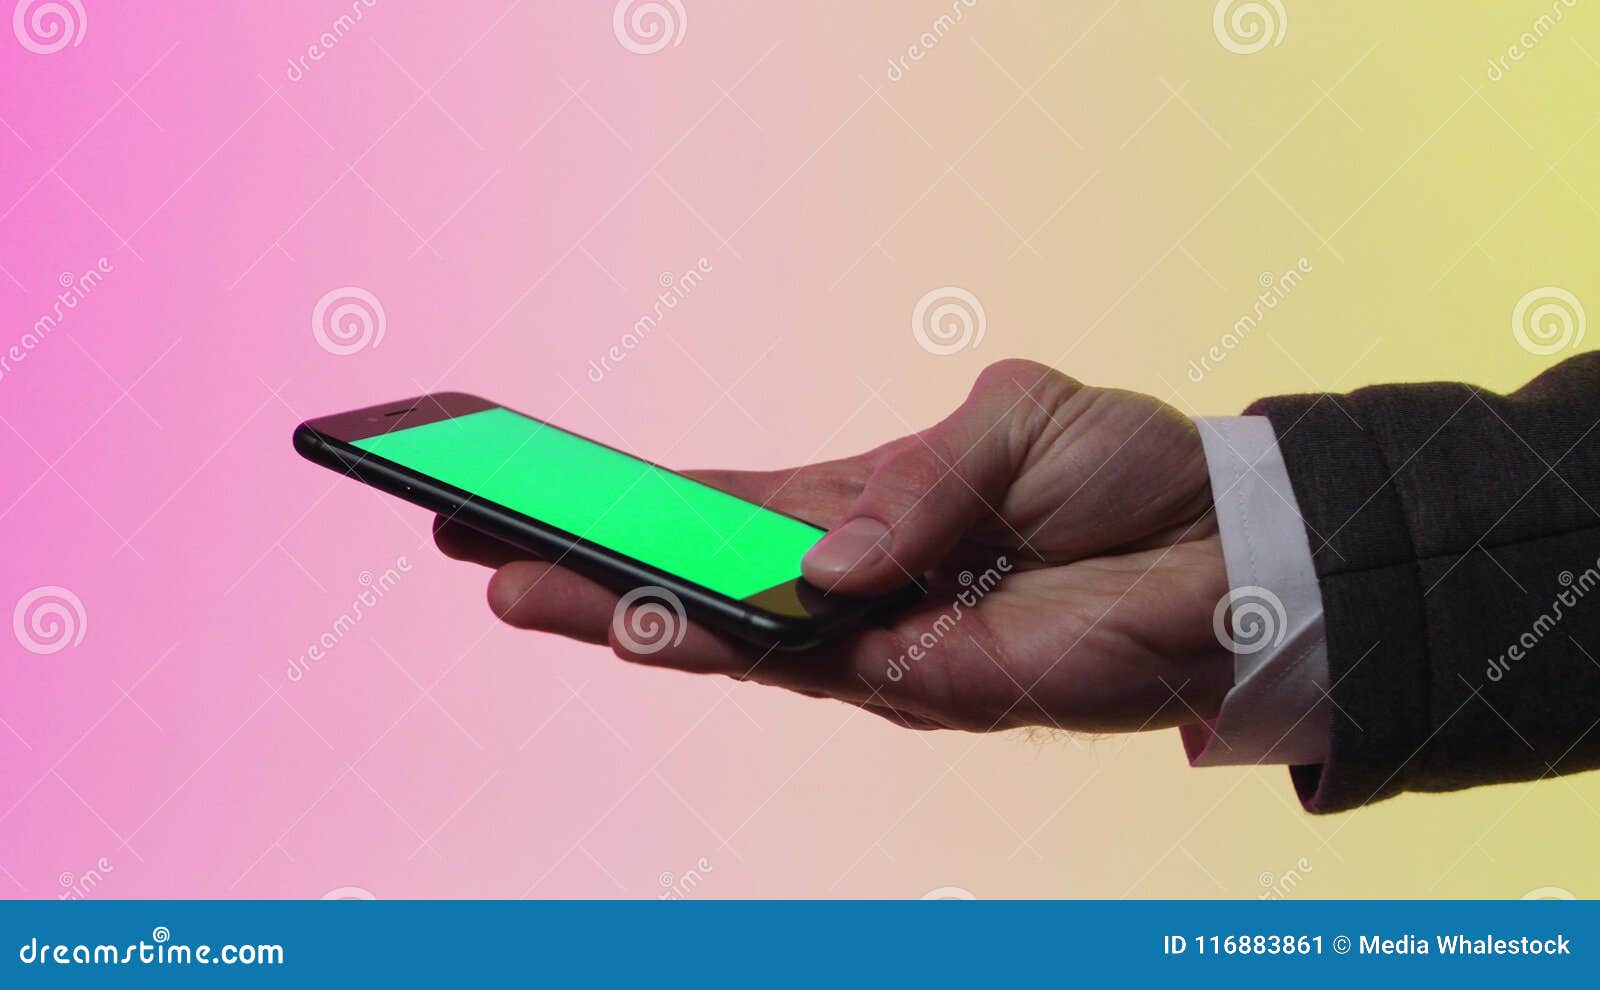 Green Screen on the Mobile. Stock Stock Image - Image of finger ...